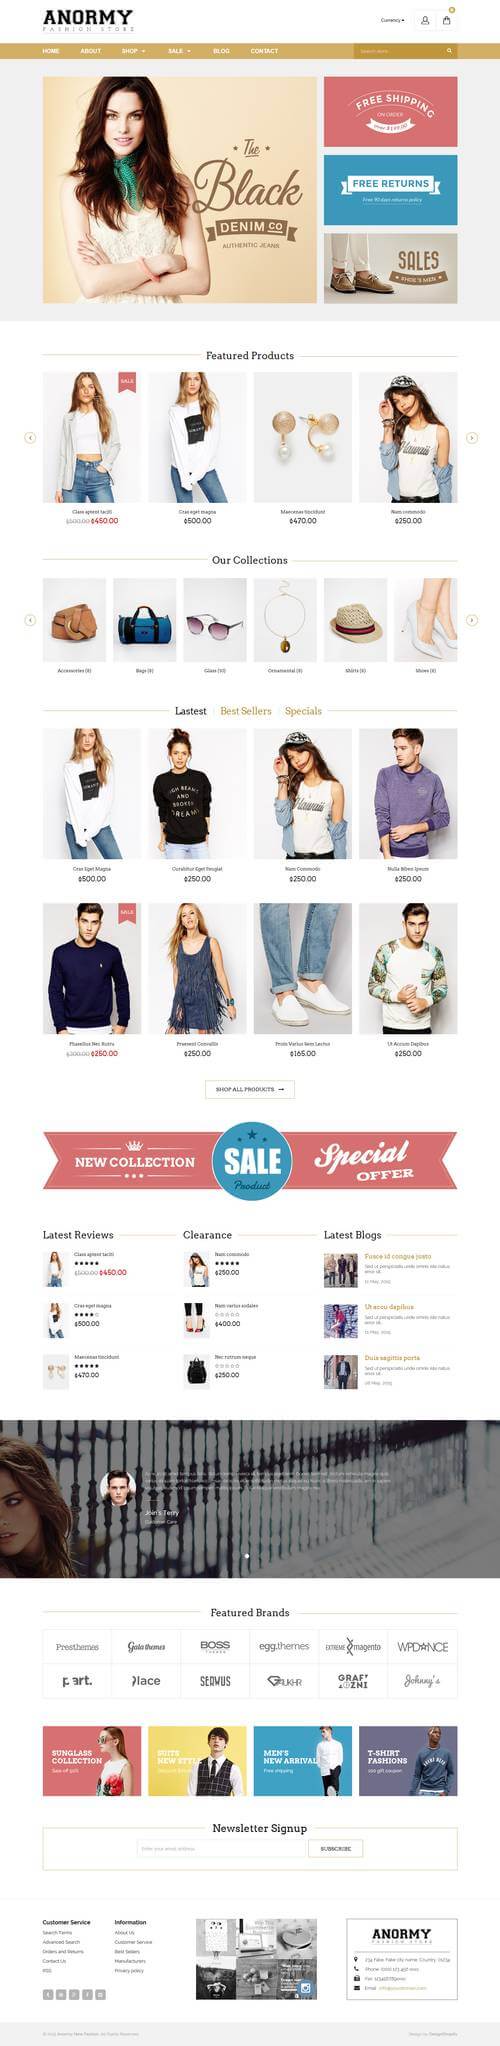 Download Anormy - A Flexible Shopify Theme -Top Shopify Themes For Fashion Store